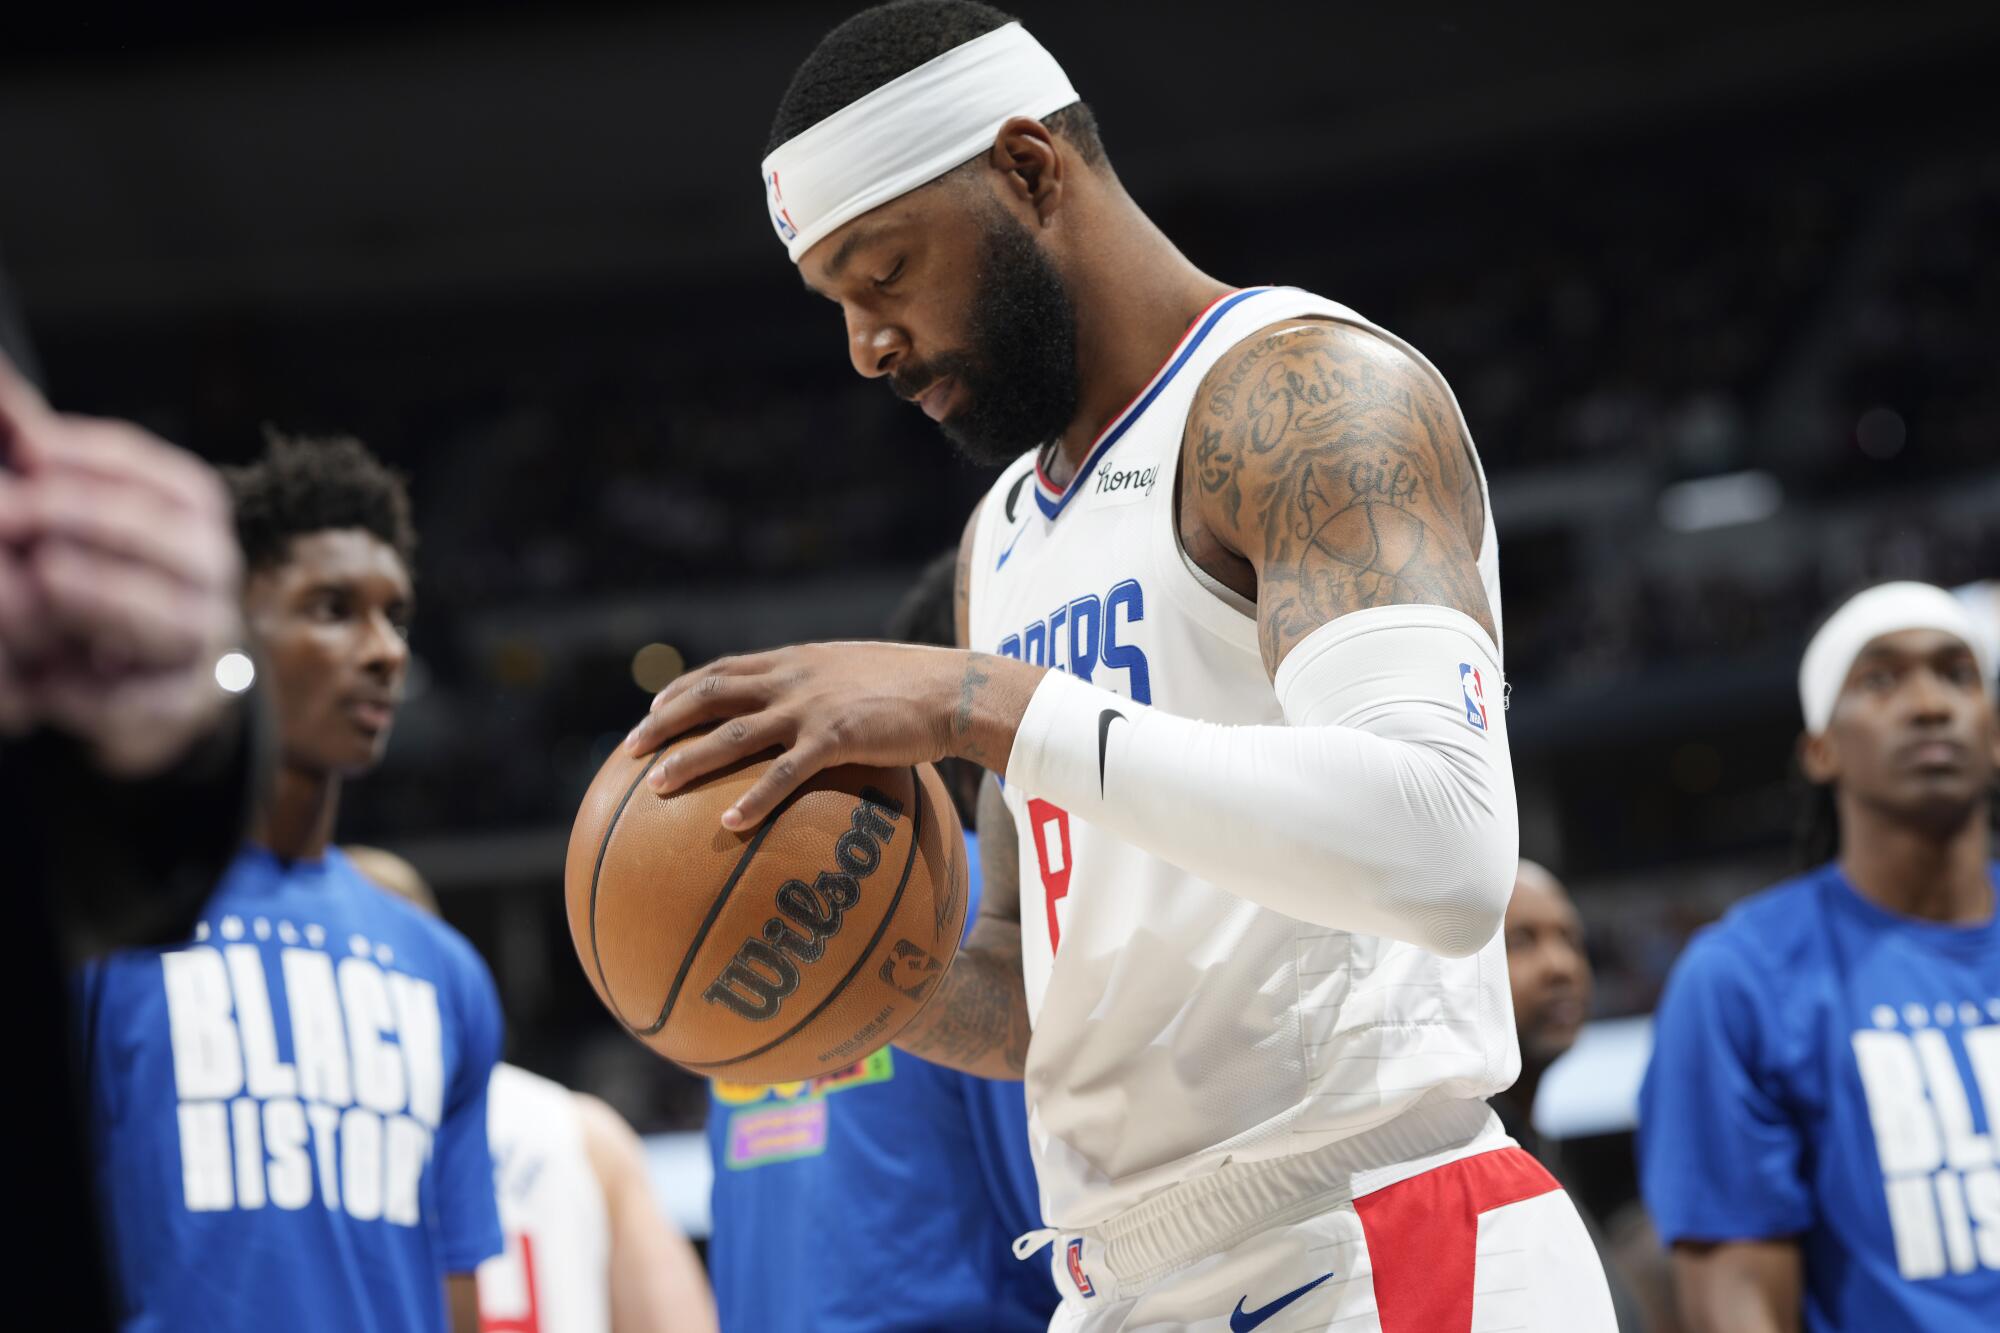 Clippers forward Marcus Morris Sr. grabs the basketball with both hands during a break in play.